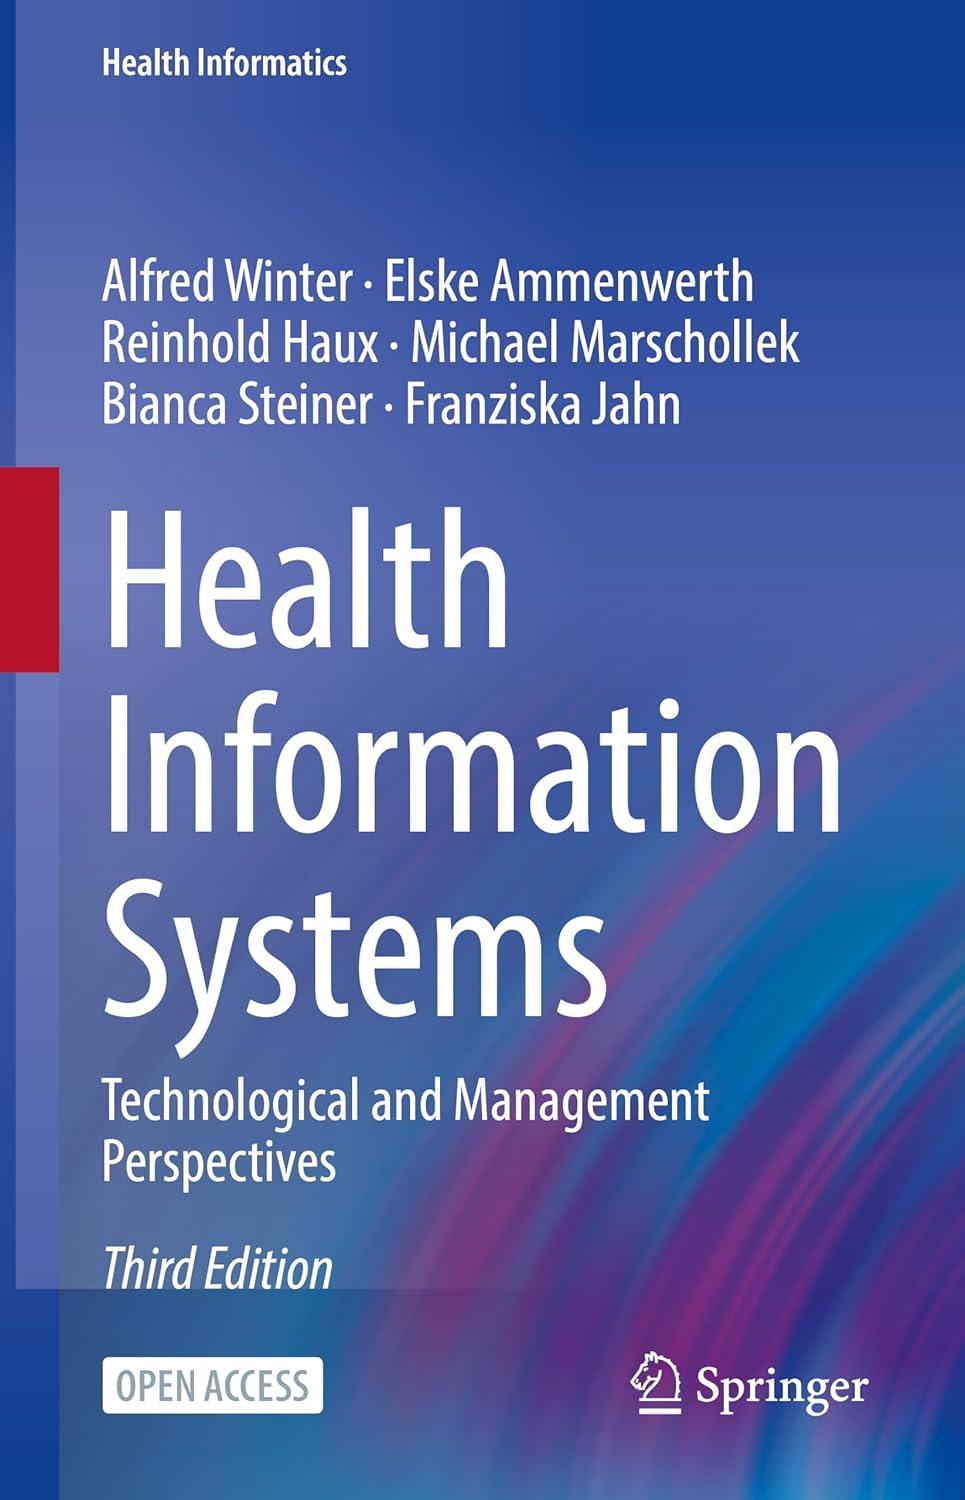 health information systems technological and management perspectives health informatics 3rd edition alfred